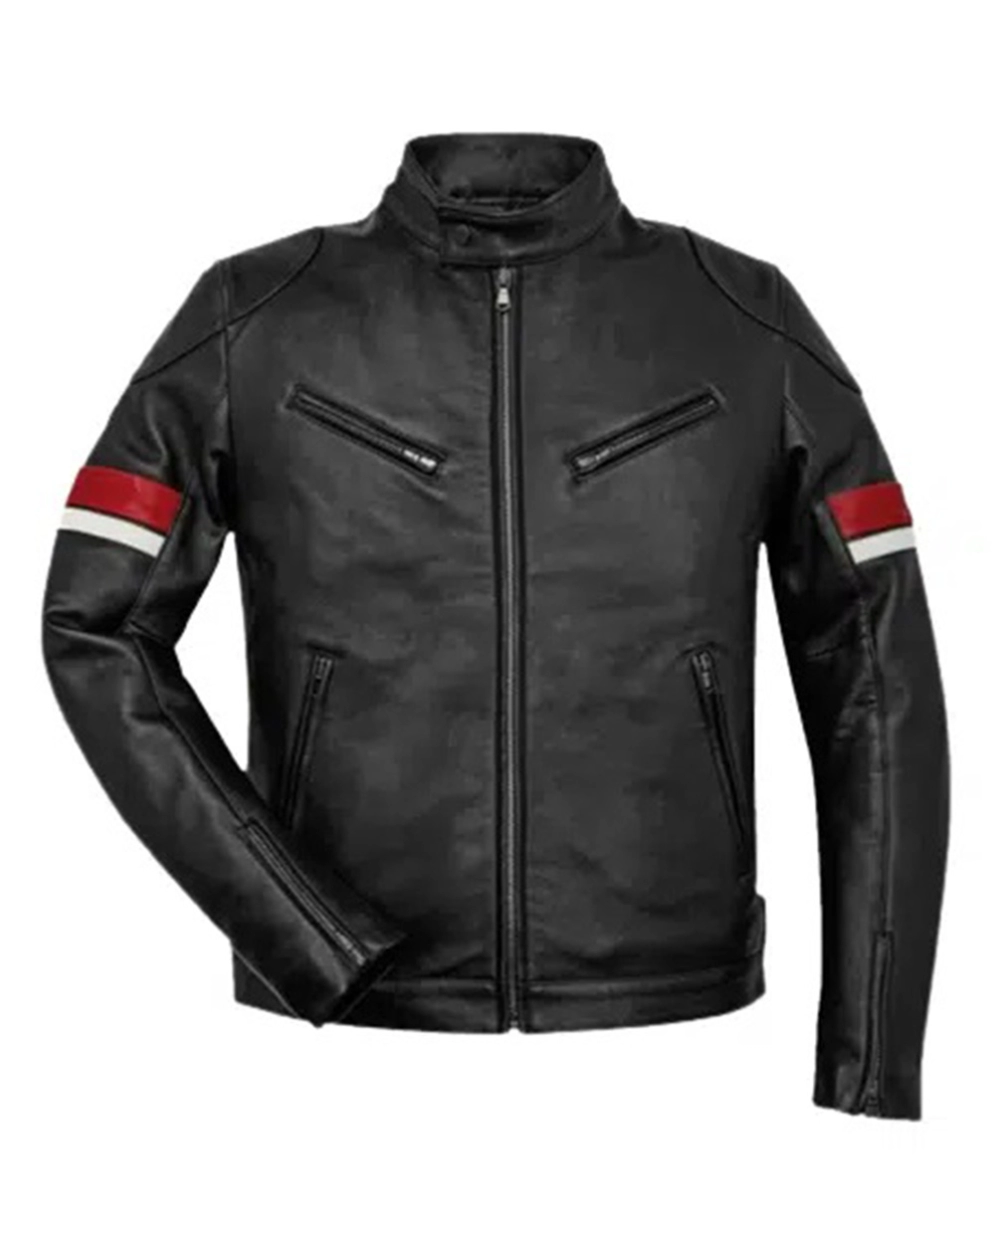 Mens Black Leather Red and White Striped Cafe Racer Jacket